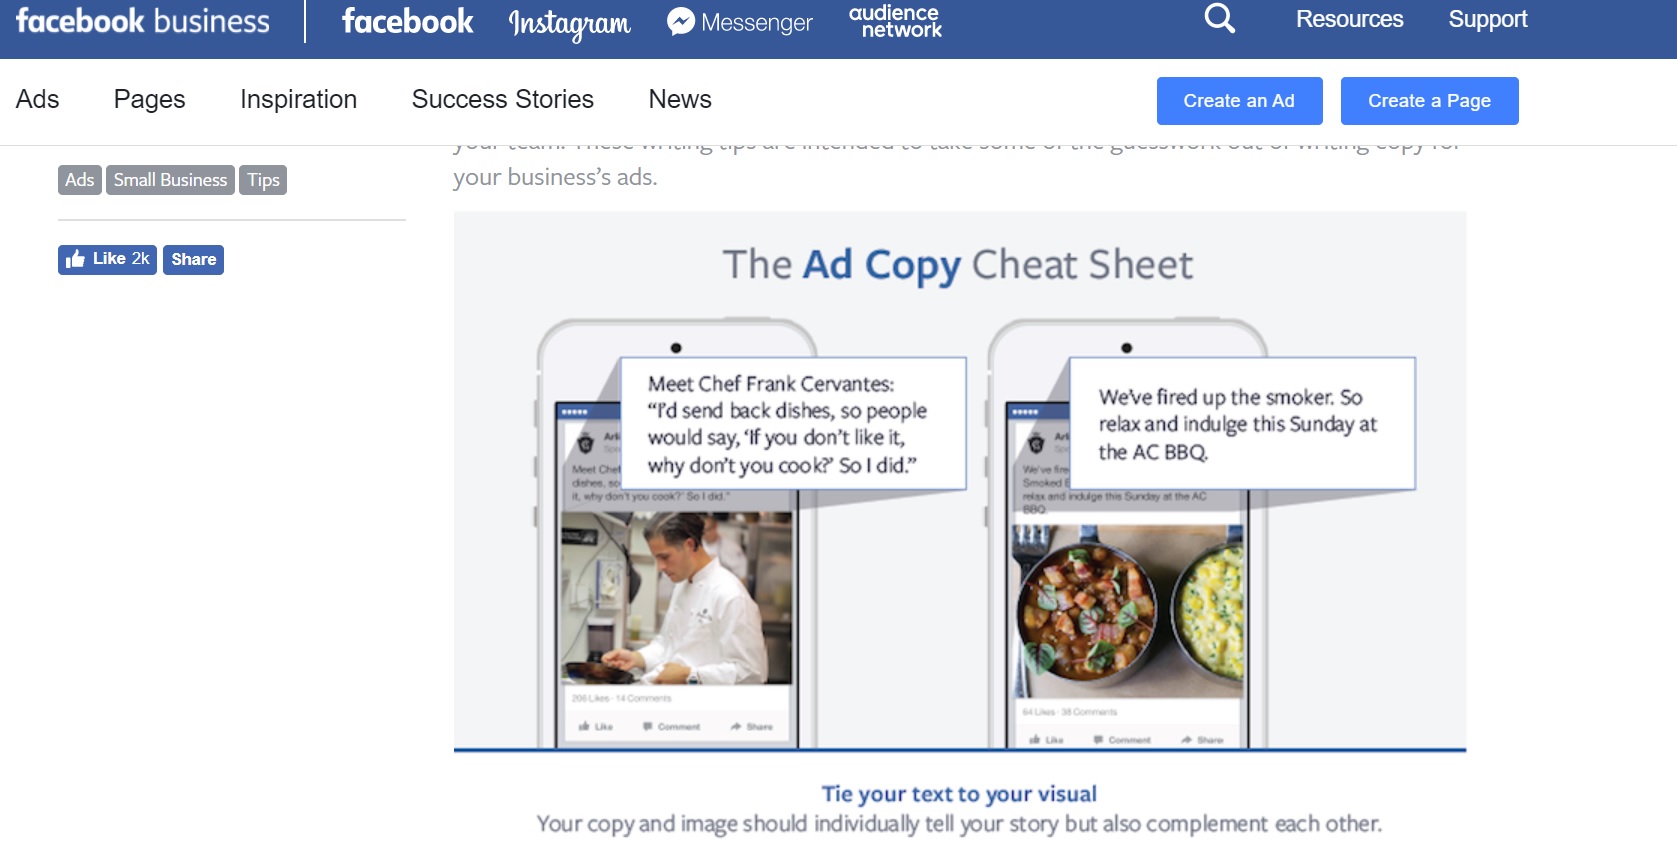 How to Write the Best Facebook Ads Copy Ever: 11 Tips from Top Experts